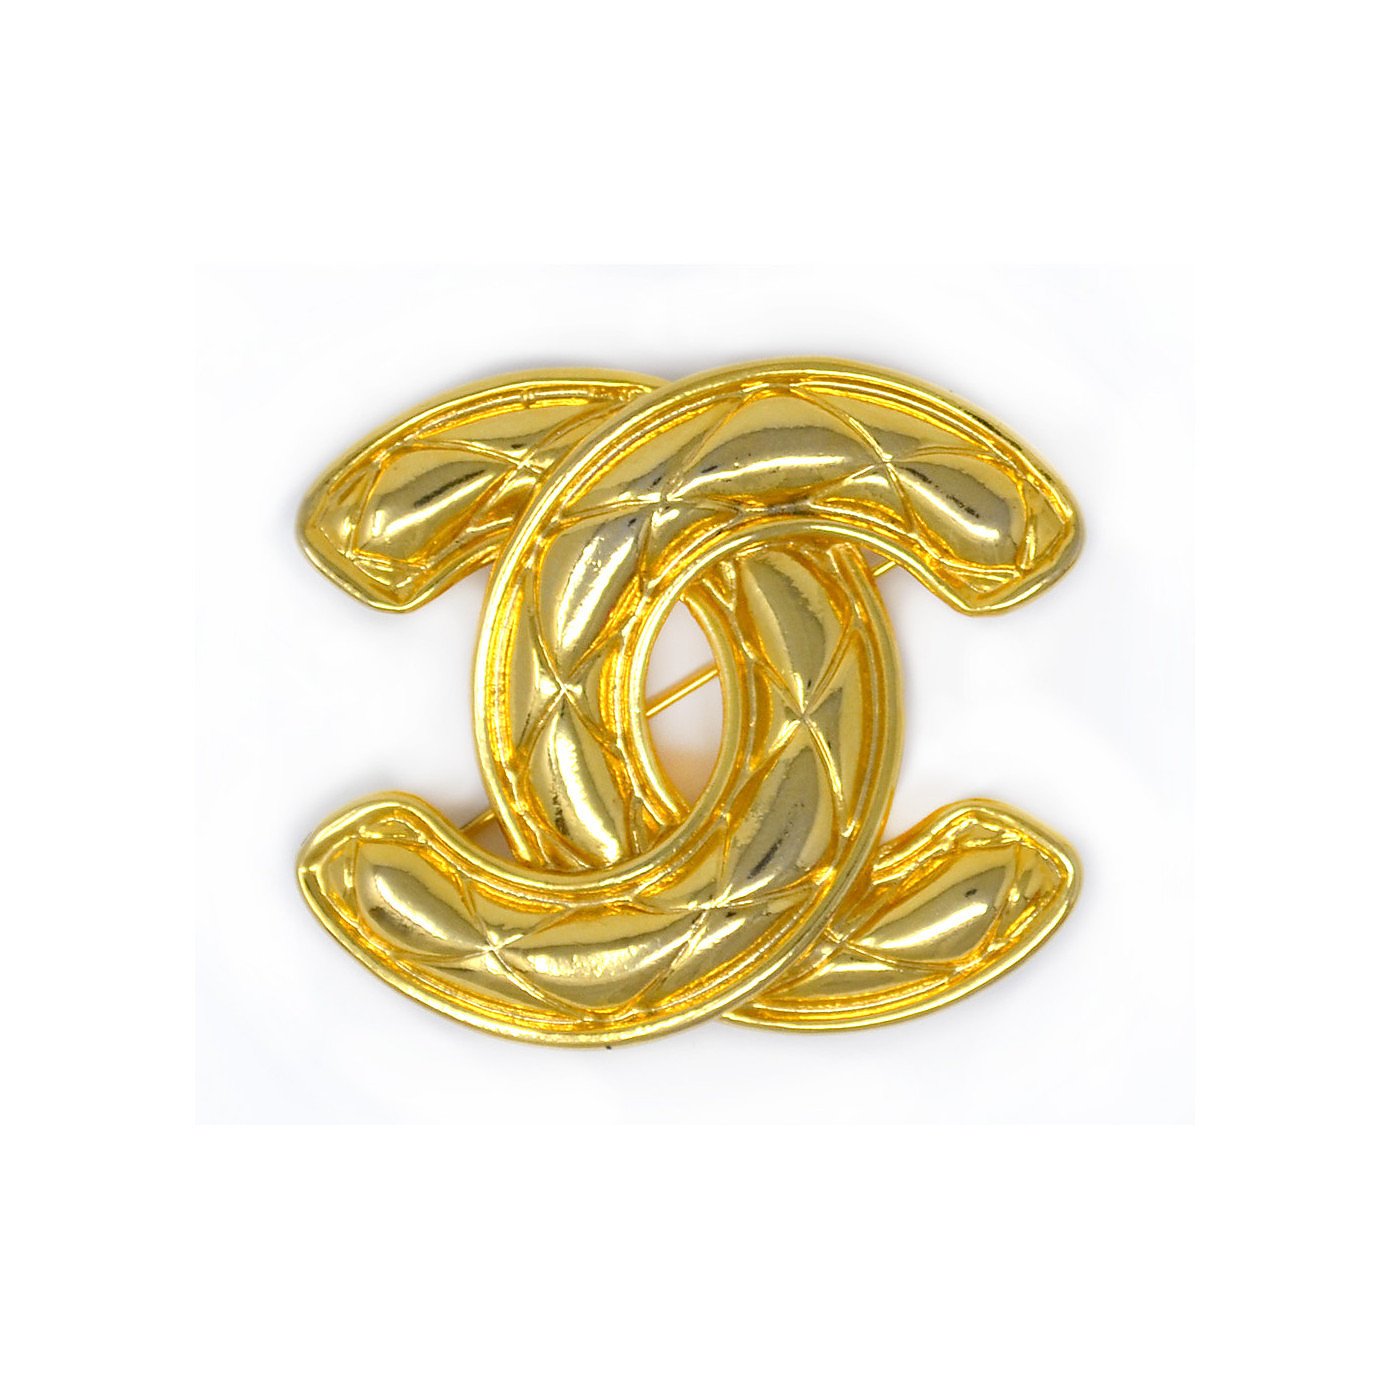 CHANEL 1980s Gold Plated CC Matelasse Brooch